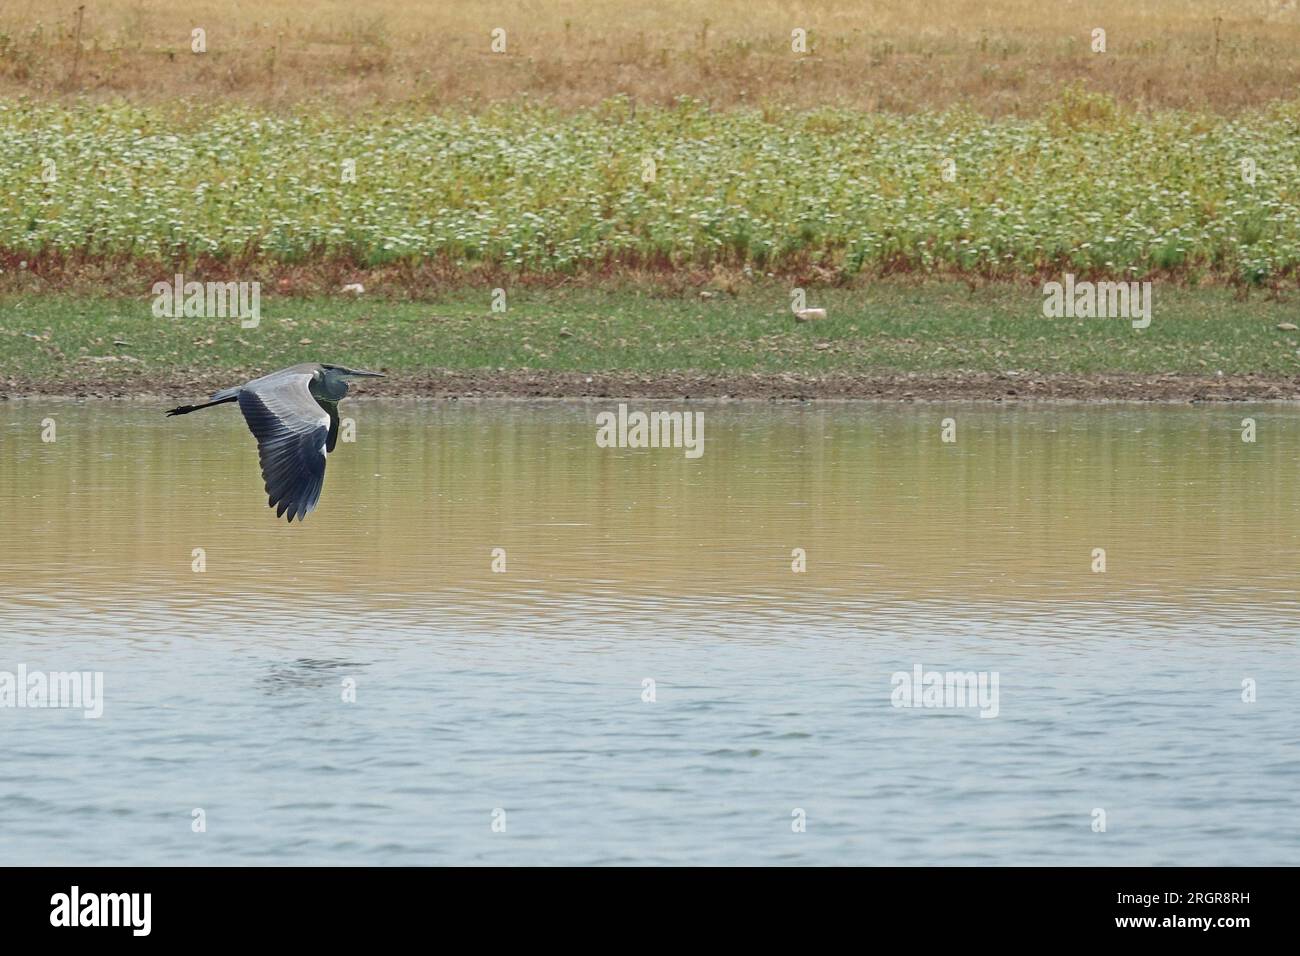 Diyarbakir, Turkey. 10th Aug, 2023. A grey heron seen flying over Lake Kabakli, which is drying up due to the extreme heat. Kabakli lake, near the city of Diyarbakir in Turkey, where hundreds of birds are sheltering, is drying up due to the effective extreme temperatures. When the waters of the lake receded about 150 meters in the last month, wild birds began to leave the area. Dicle University Faculty of Science Biology Department Head Prof. Dr. Ahmet Kilic said that there are few birds left in the lake, and if the water sources completely dry up, thousands of migratory birds may die without Stock Photo